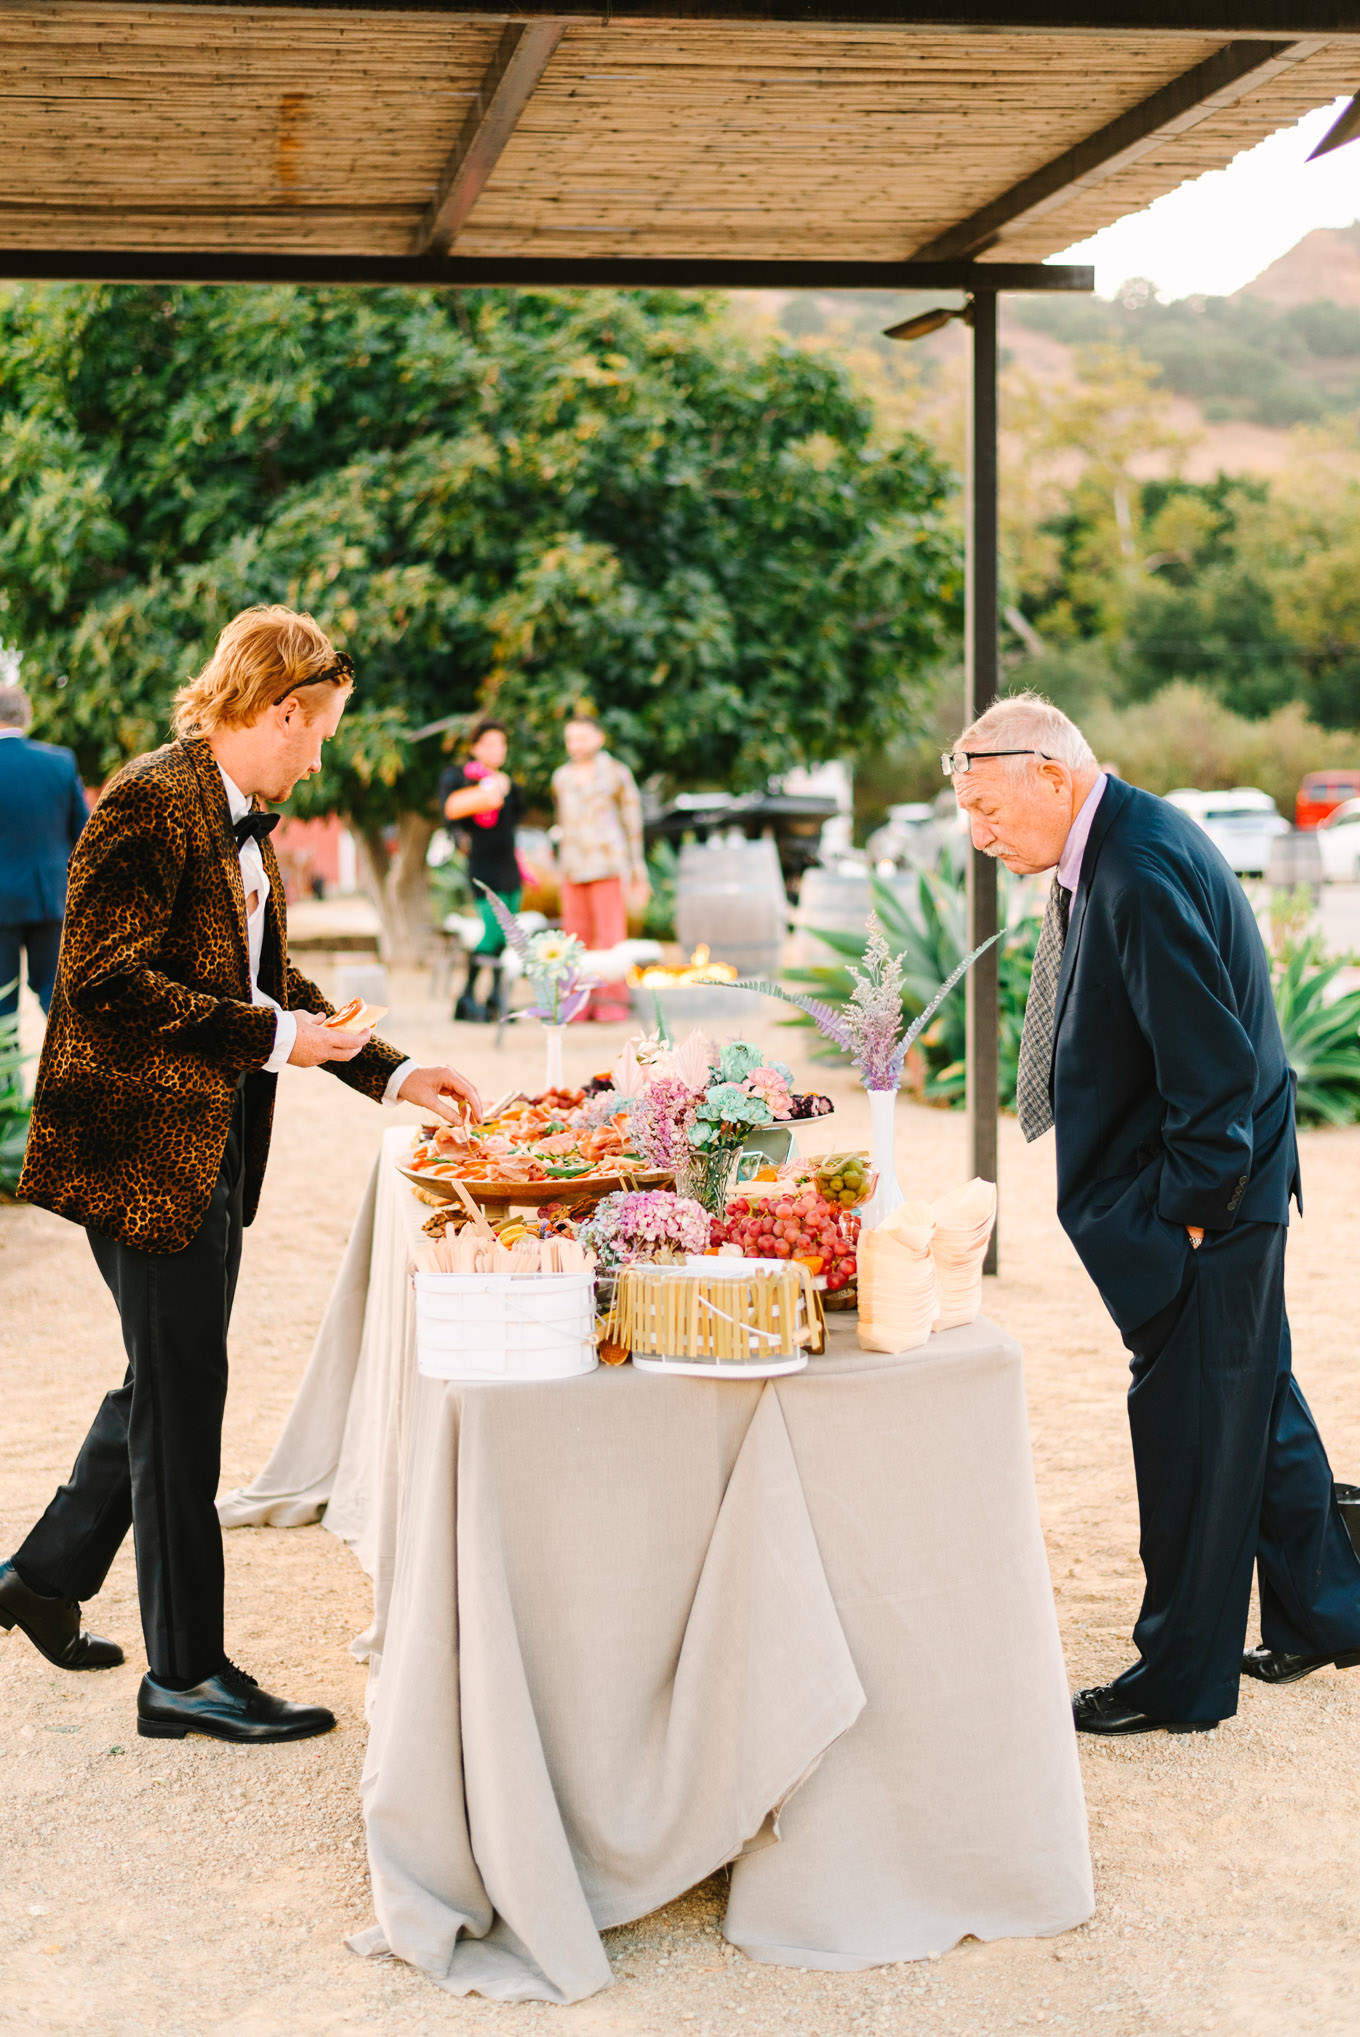 Colorful wedding guests enjoying cocktail hour | Colorful and quirky wedding at Higuera Ranch in San Luis Obispo | #sanluisobispowedding #californiawedding #higueraranch #madonnainn   
Source: Mary Costa Photography | Los Angeles